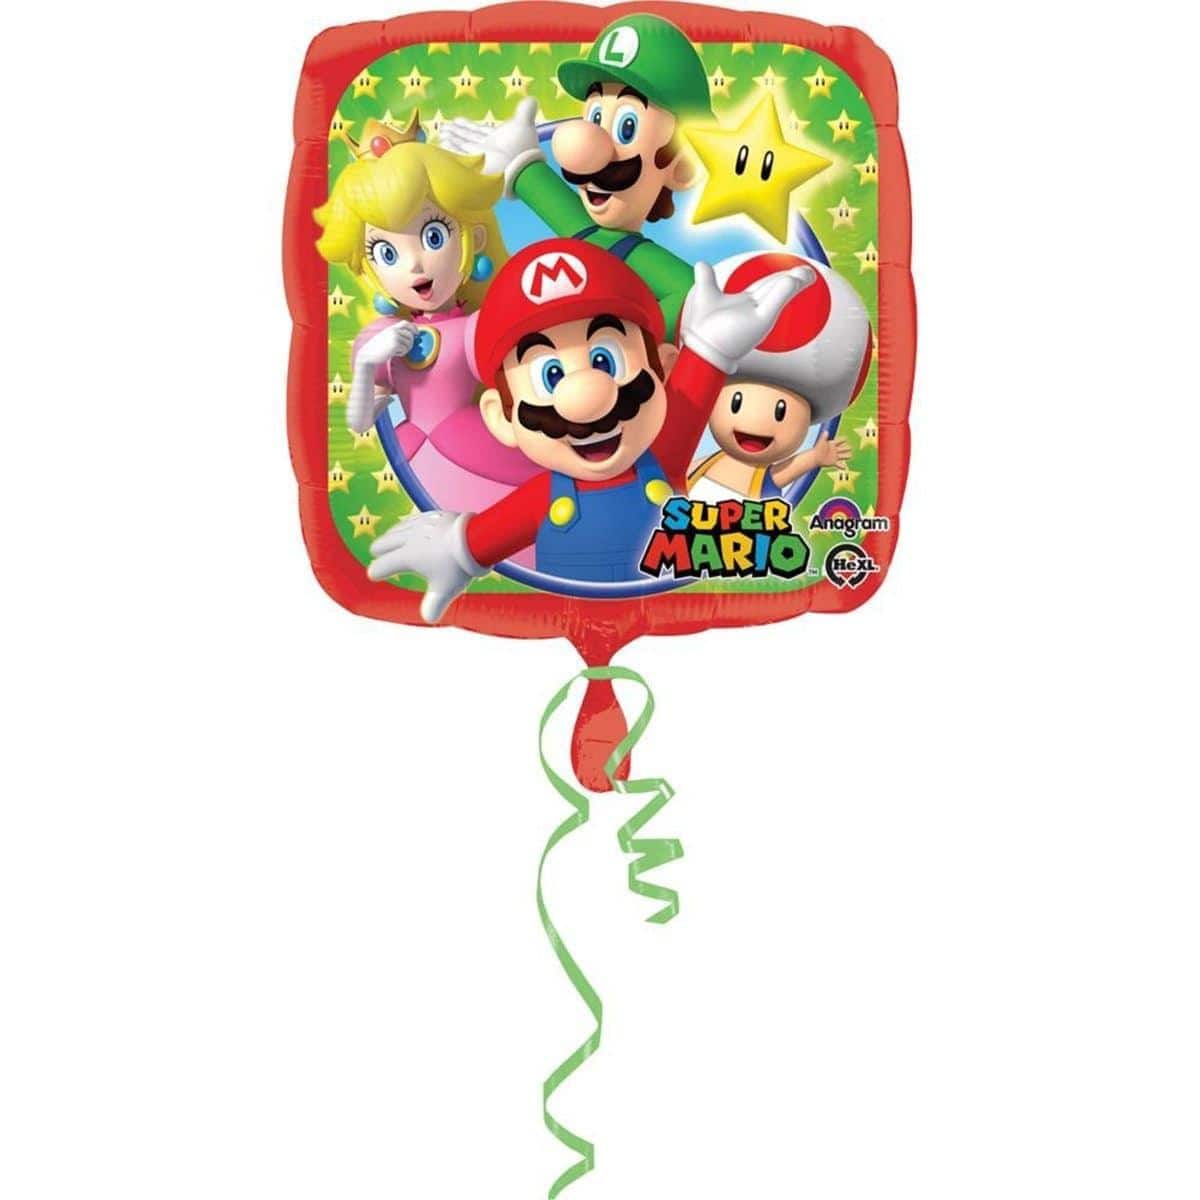 Buy Balloons Super Mario Foil Balloon, 18 Inches sold at Party Expert